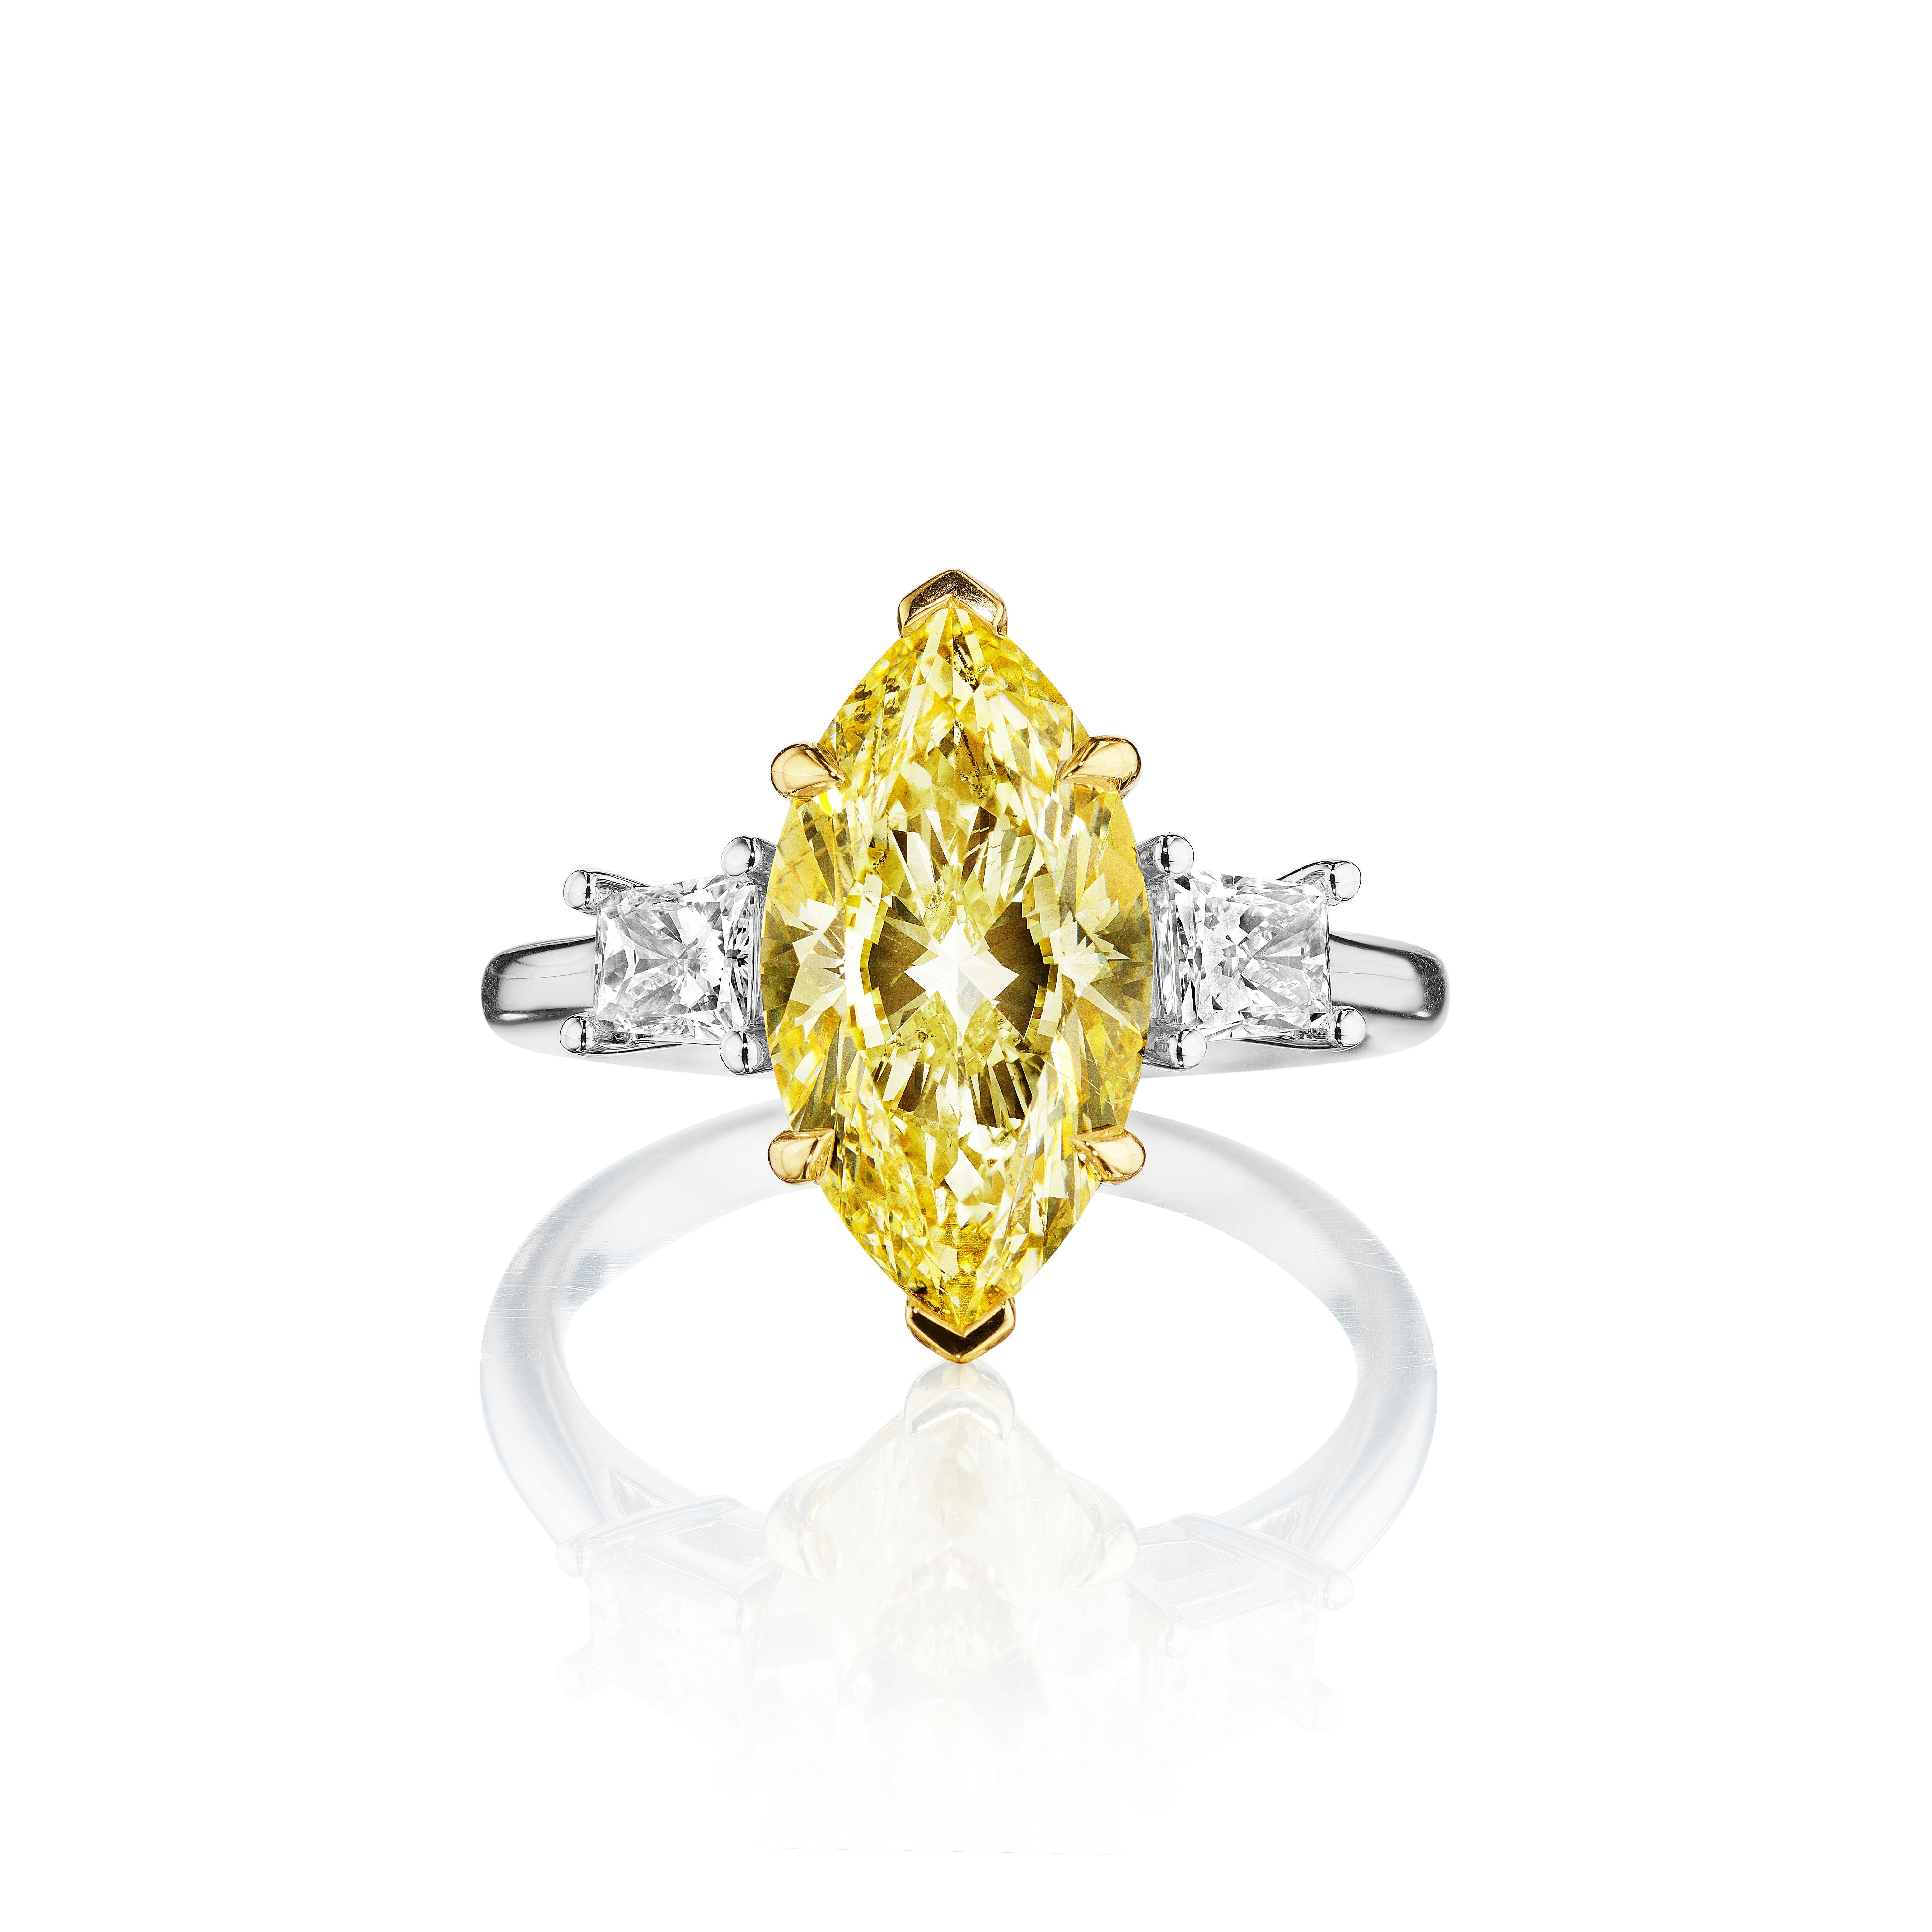 •	Platinum & 18KT Two Tone
•	Size: 6.50
•	Carat Weight: 4.09 Carats

•	Number of Marquise Diamonds: 1
•	Carat Weight: 3.52ctw
•	Color: Fancy Light Yellow
•	Clarity: SI2
•	GIA: 6227881216

•	Number of Baguette Diamonds: 2
•	Carat Weight: